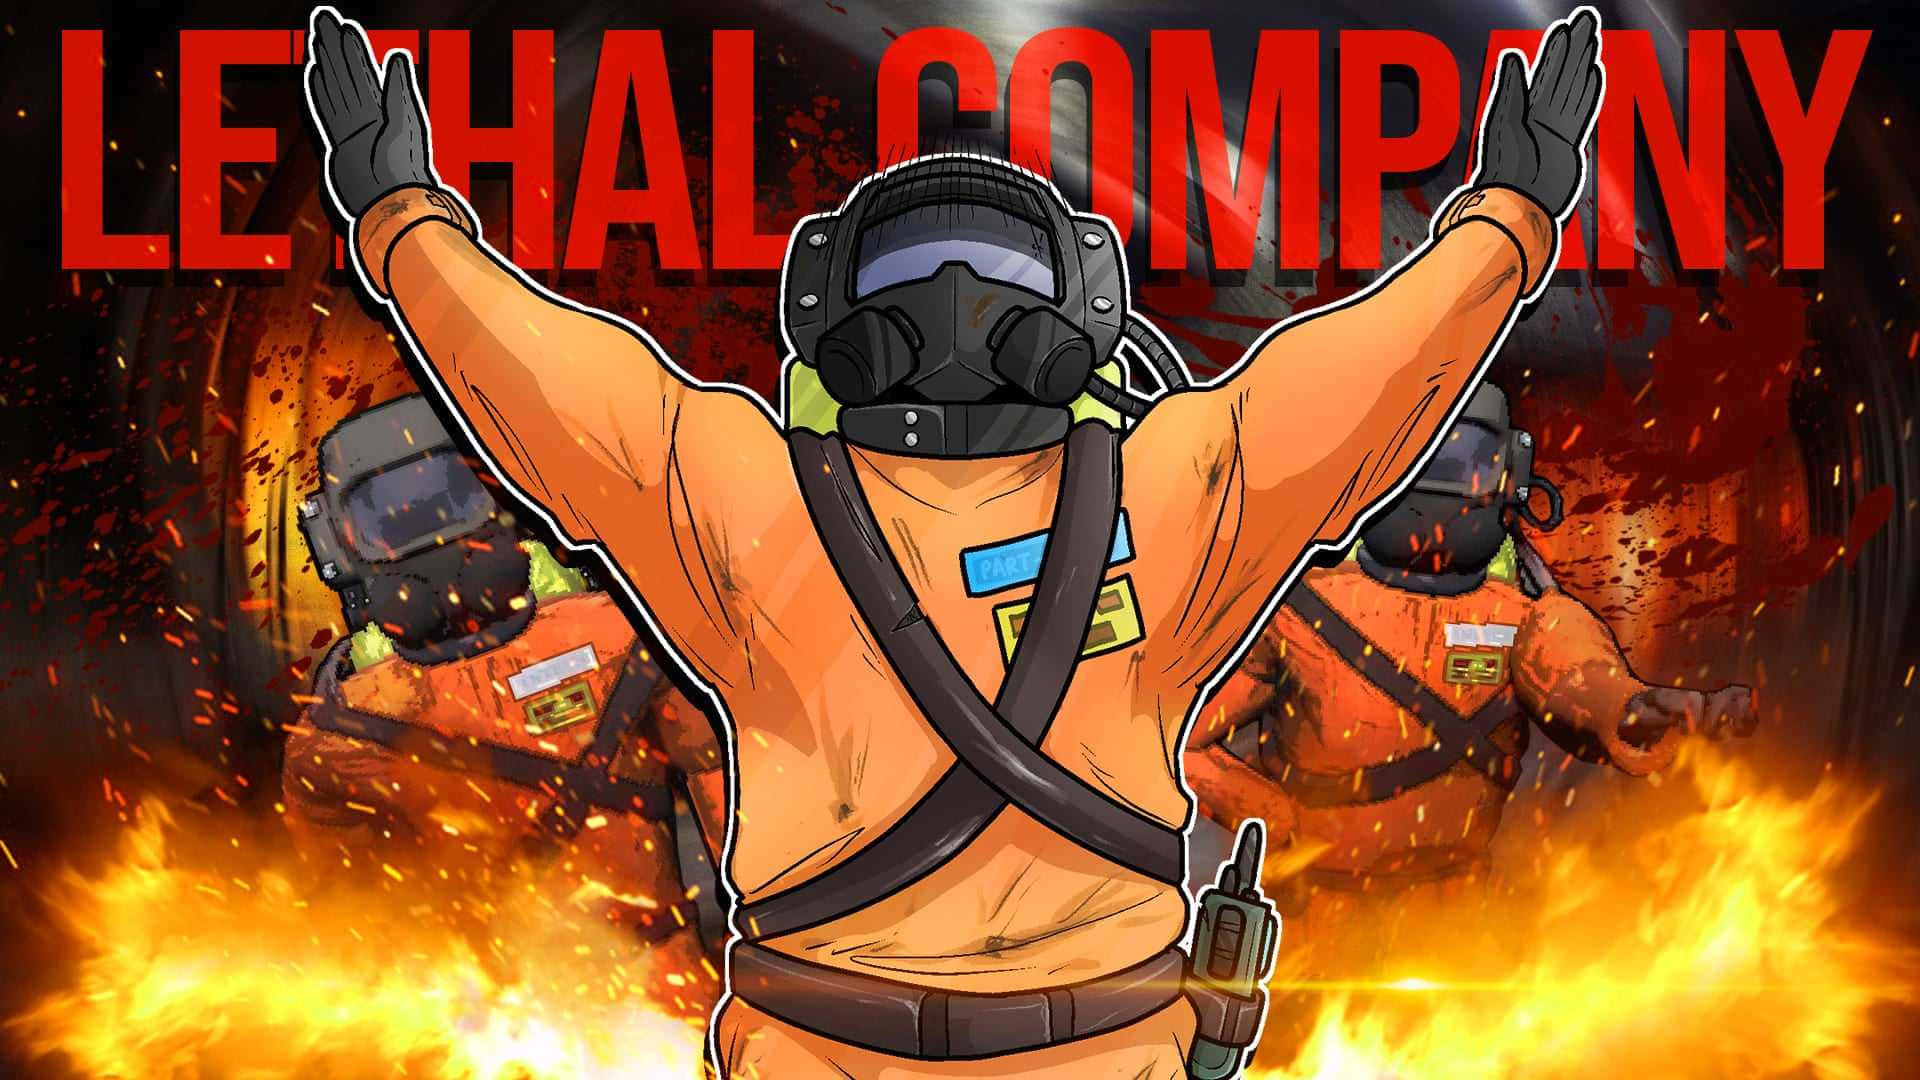 Lethal Company Explosive Action Wallpaper